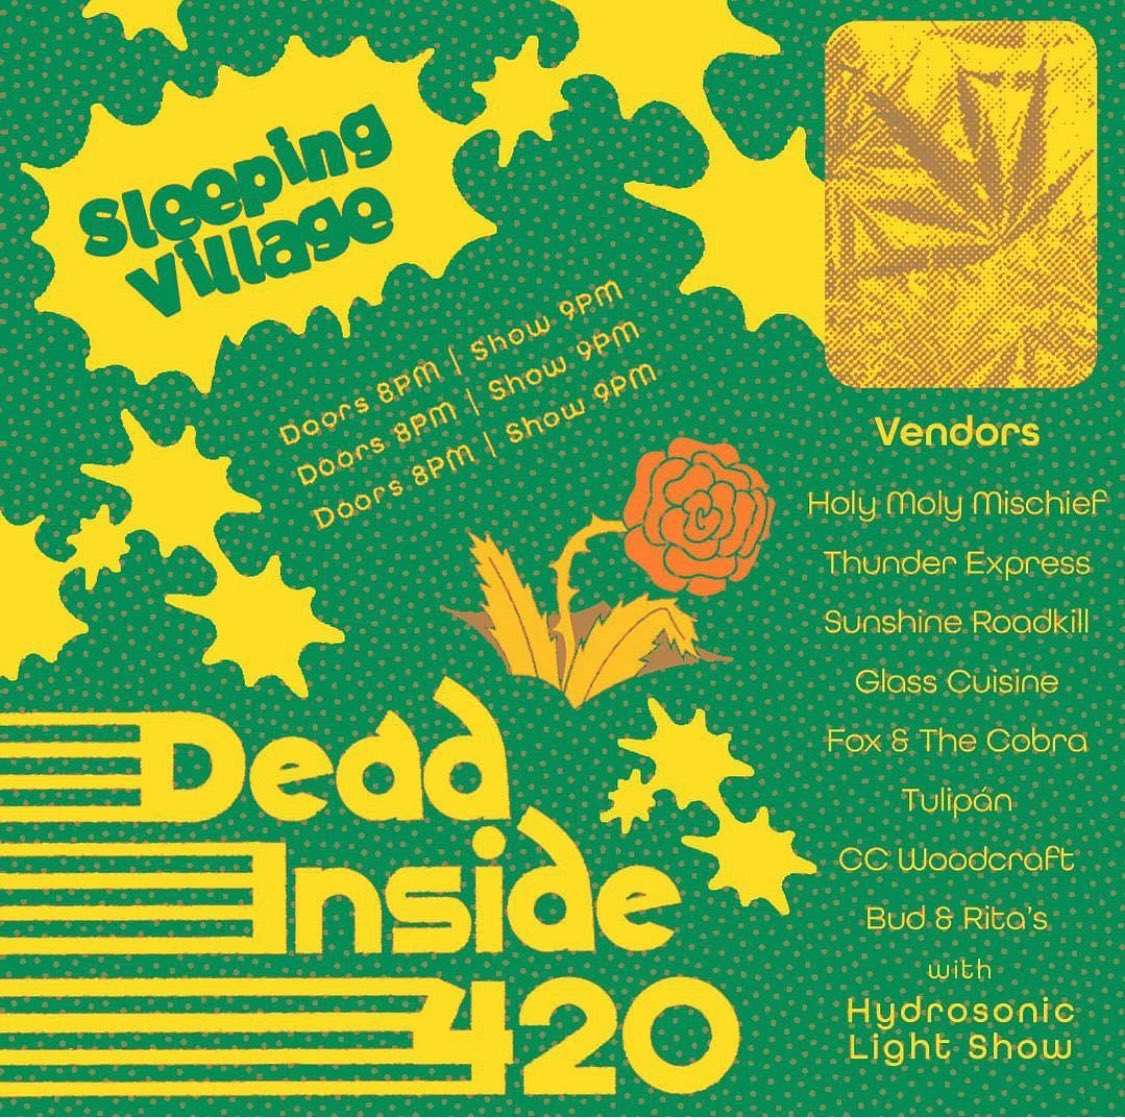 Chicago’s Dead Inside—monthly-ish all vinyl, all live, all Dead listenings/happenings—is a big reason why Chicago remains an elite Dead town. Their 4/20 @Sl33pingVillag3 installment looks predictably sick, with vendors and light show.